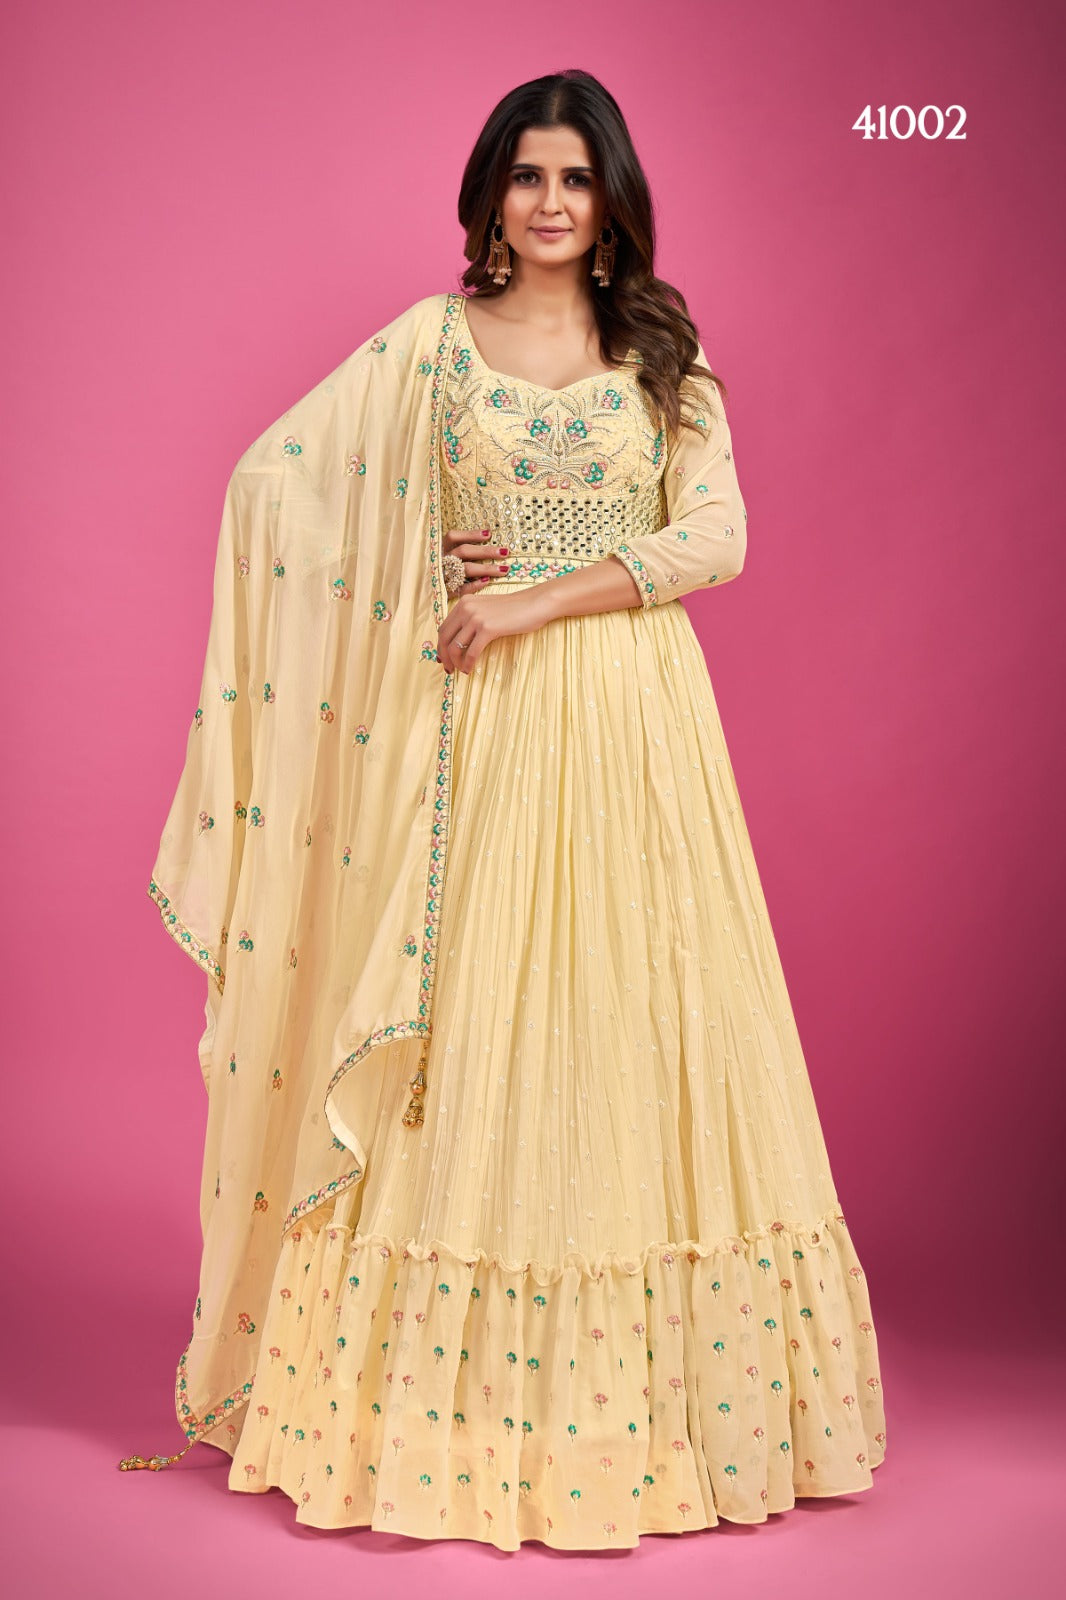 ARYA ZOYA VOL. 1 DESIGNER GOWN Anant Tex Exports Private Limited